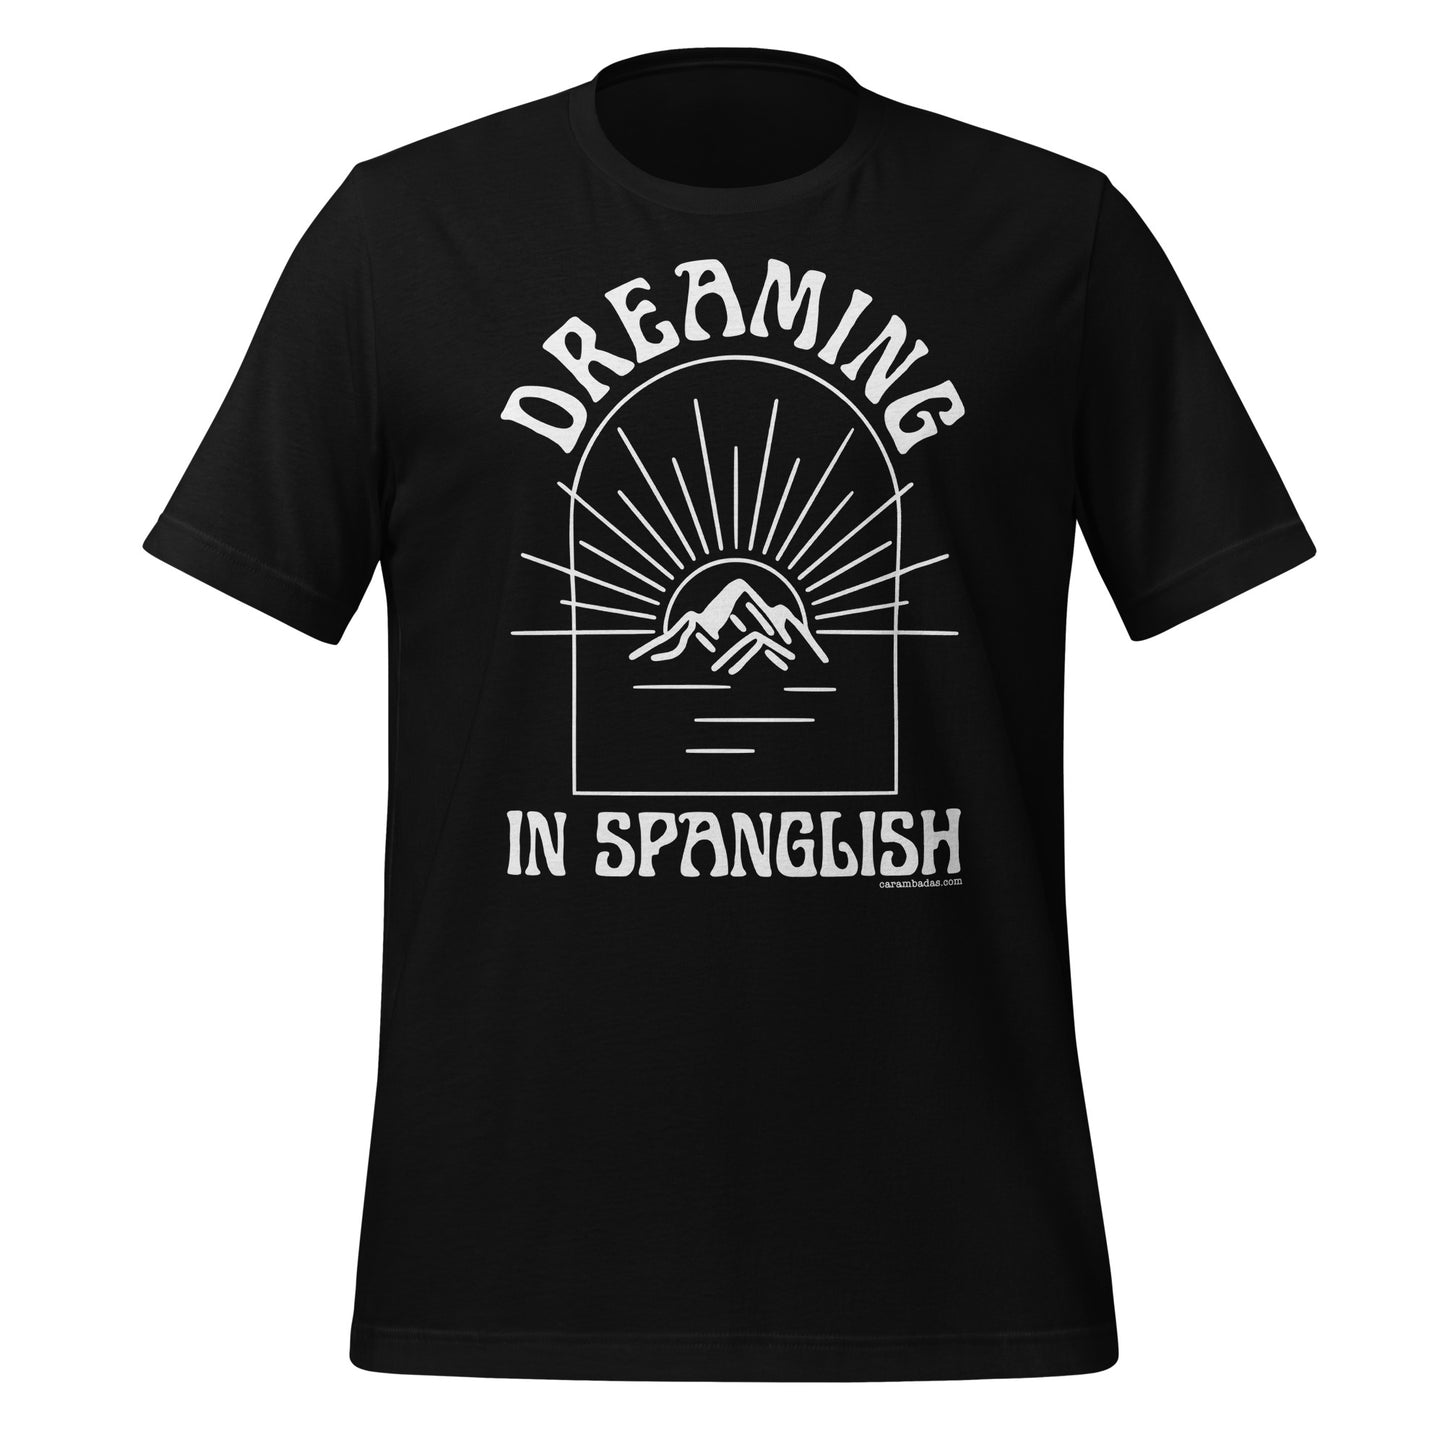 Dreaming as big as mountains in Spanglish Unisex t-shirt